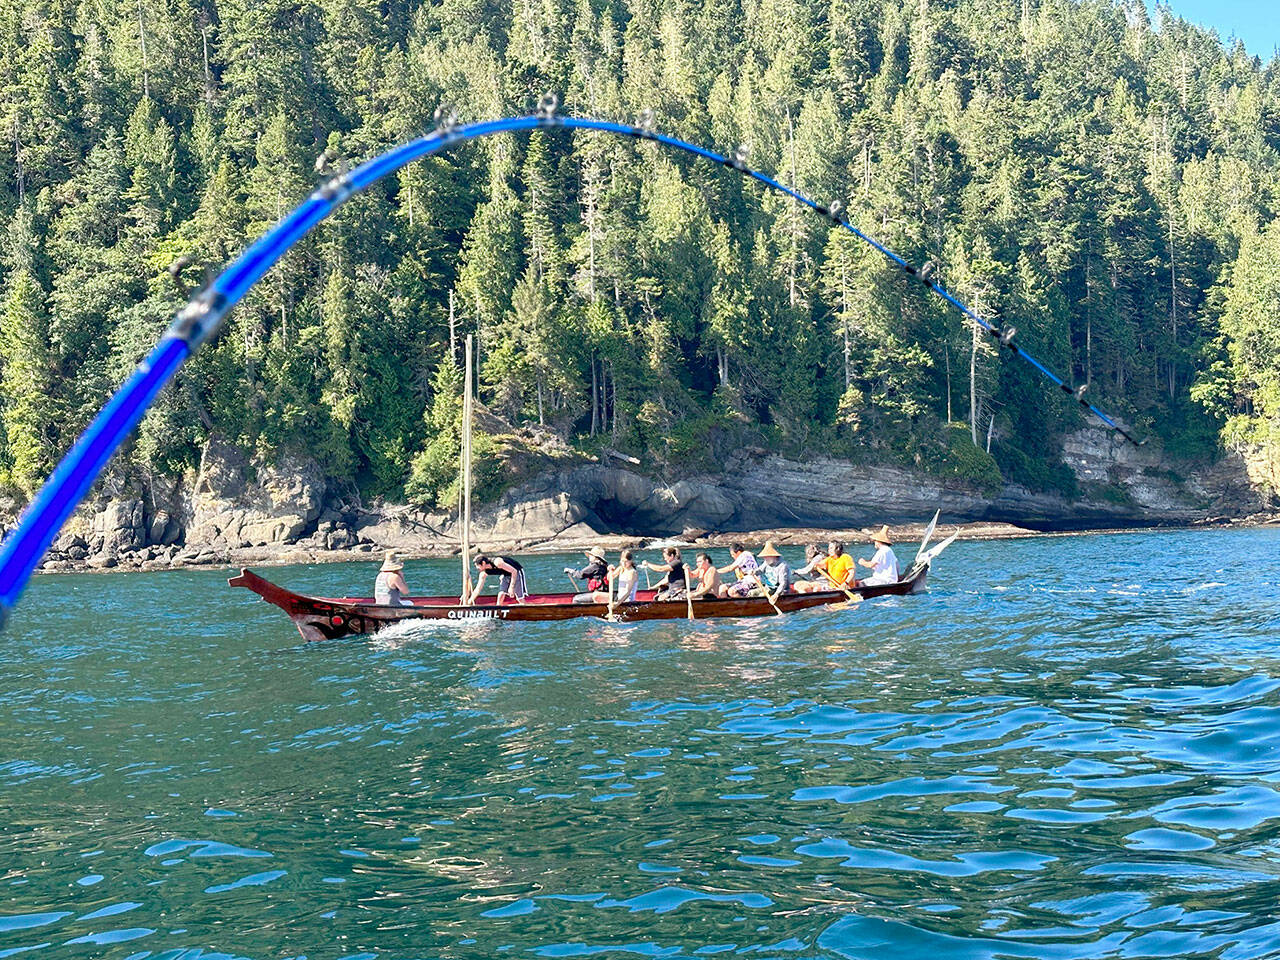 The Quinault Nation canoe cuts through Freshwater Bay on the way to the mouth of the Elwha River and passes the downrigger line of Sequim angler John L. Beath during a July 23 fishing outing. (John L. Beath)